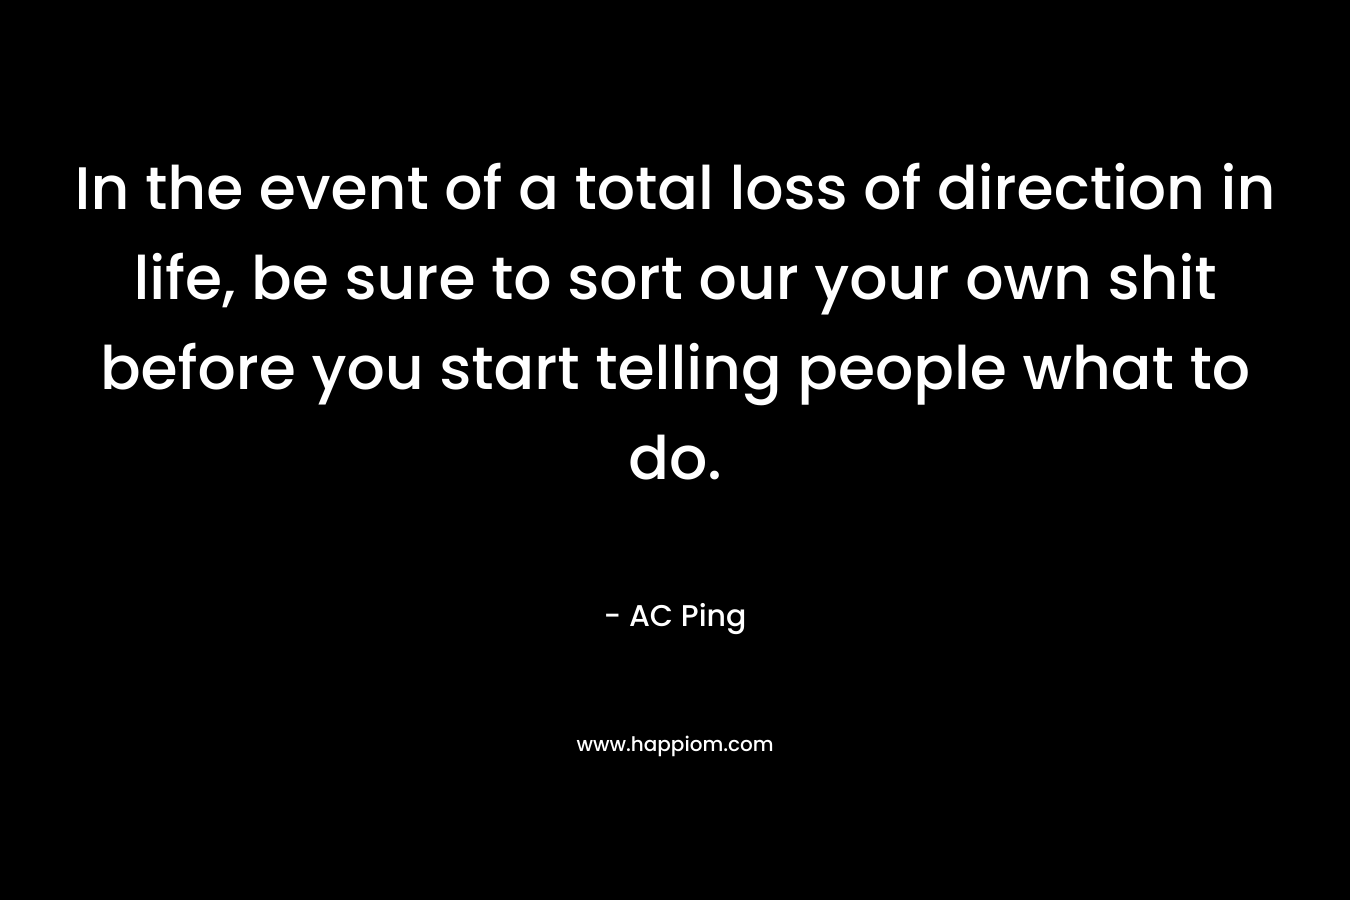 In the event of a total loss of direction in life, be sure to sort our your own shit before you start telling people what to do.